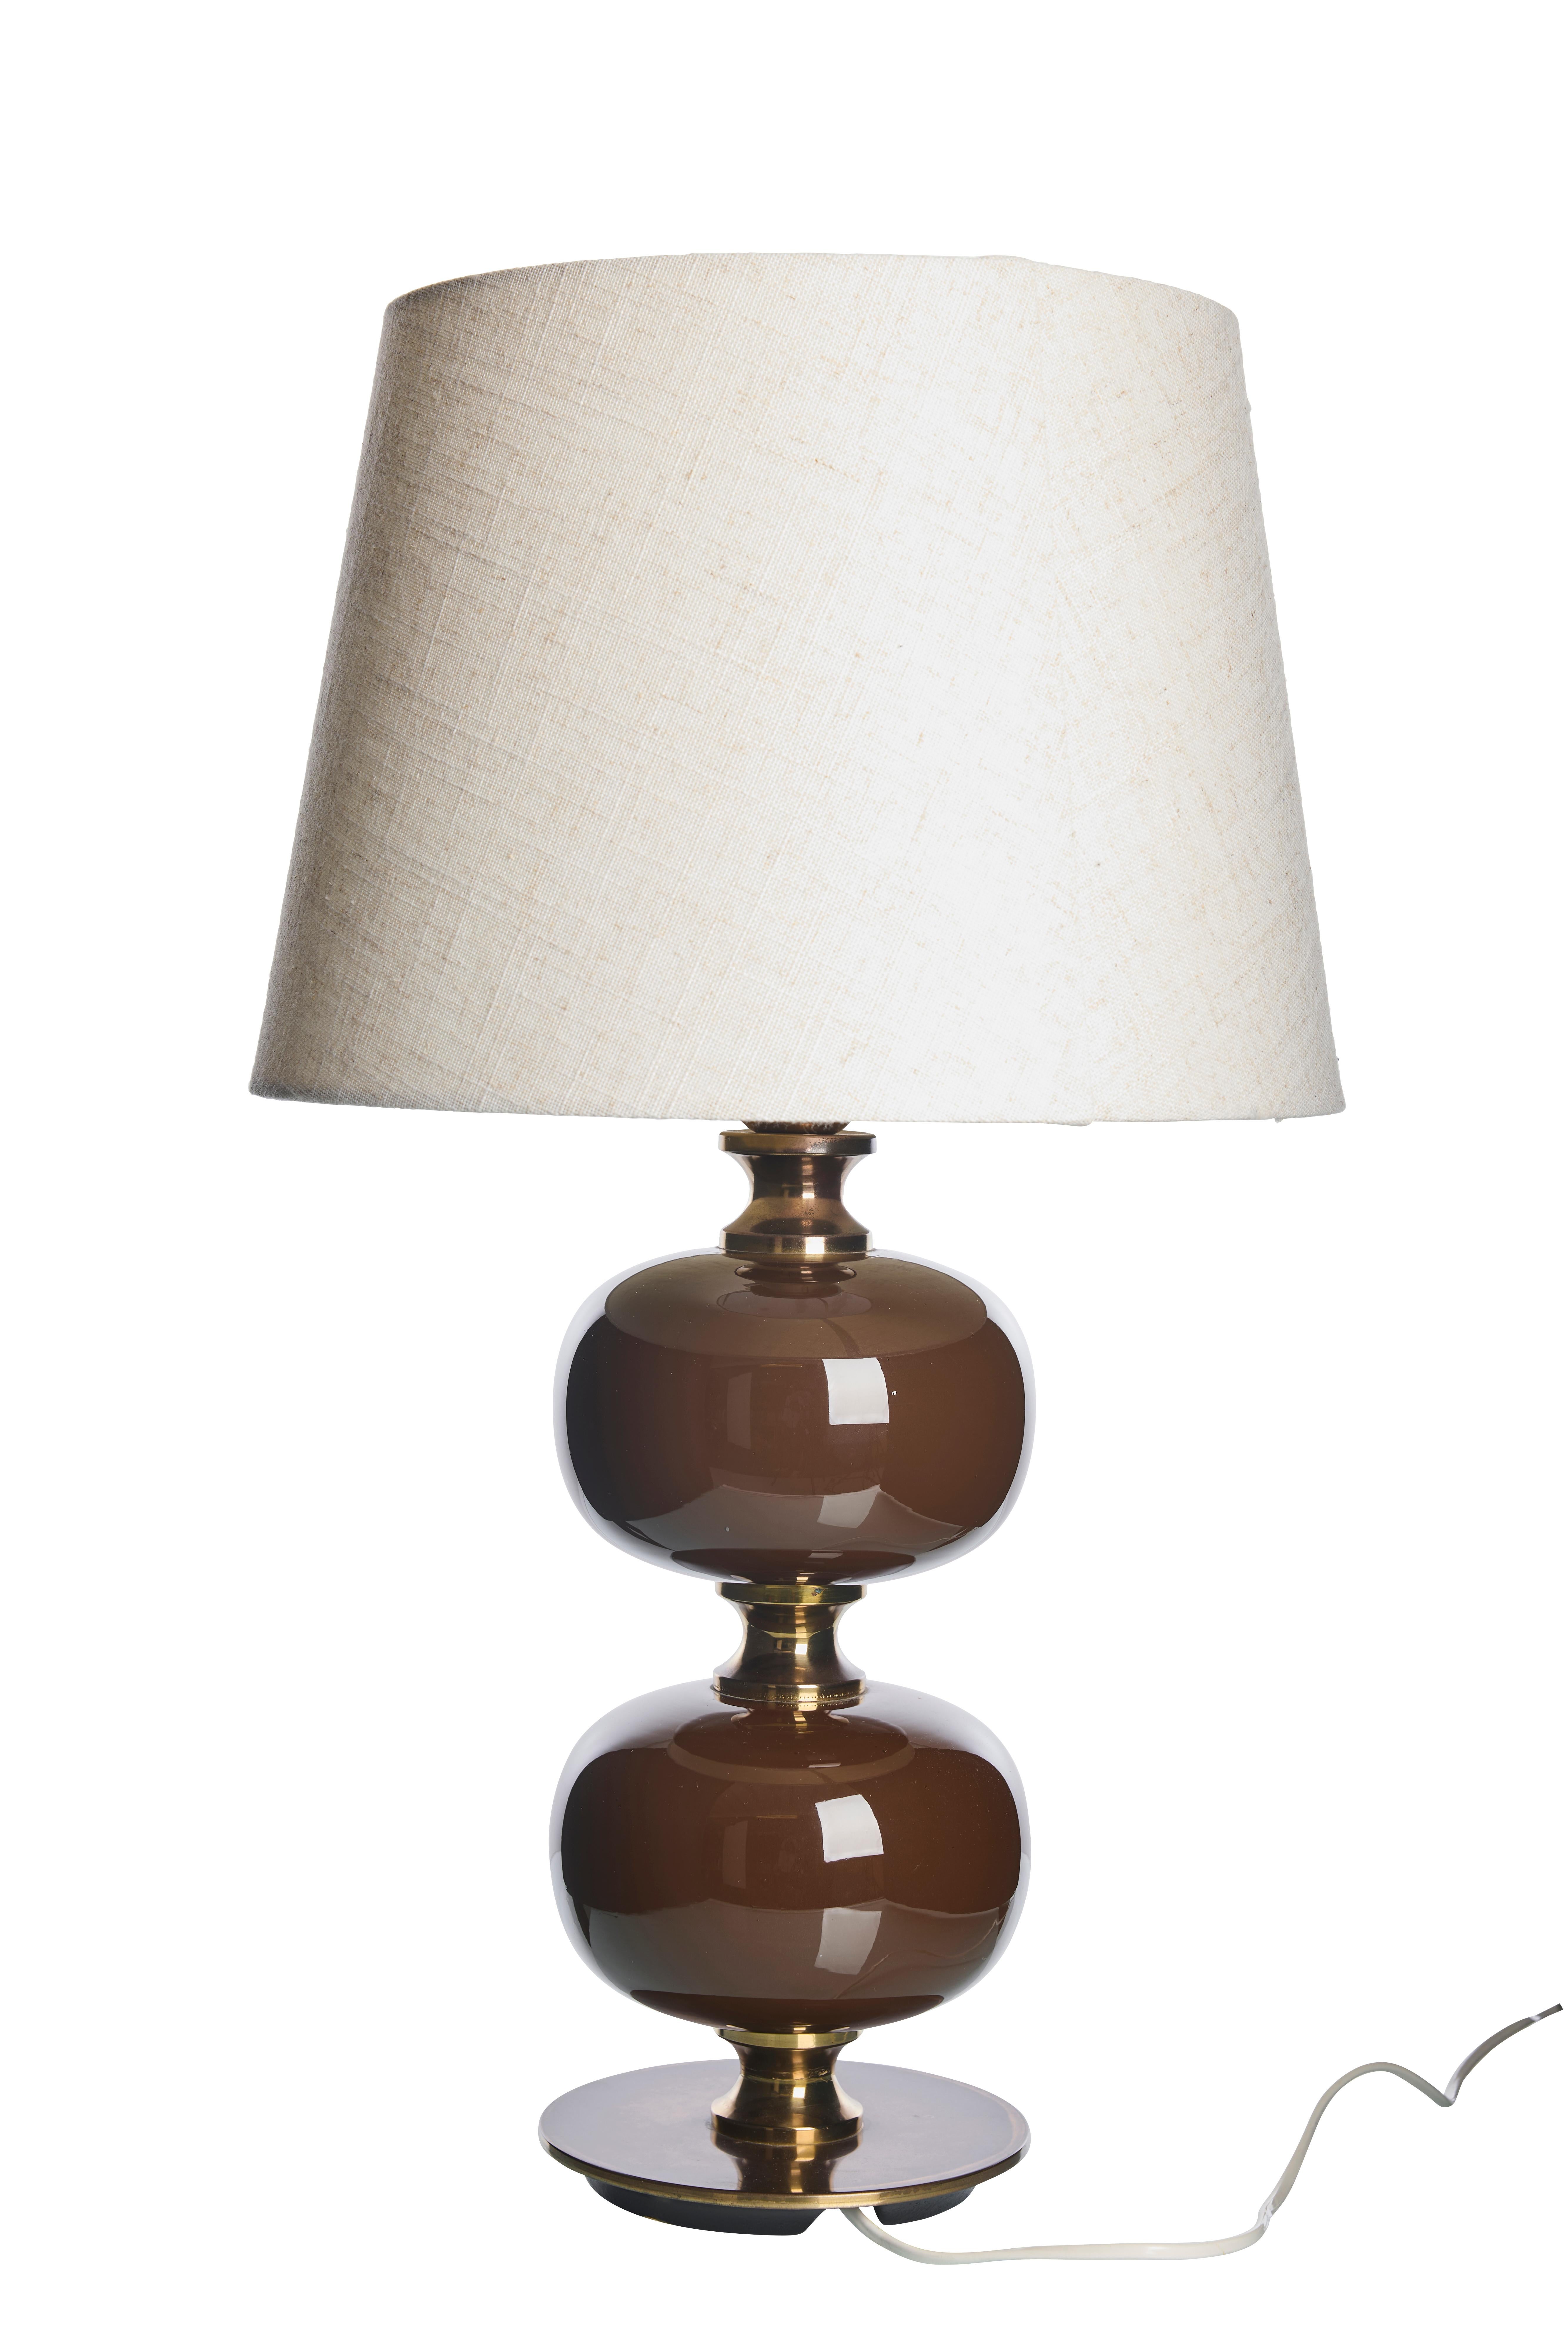 Swedish Glass and Brass Table Lamp by Tranås Stilarmatur, 1960s For Sale 3